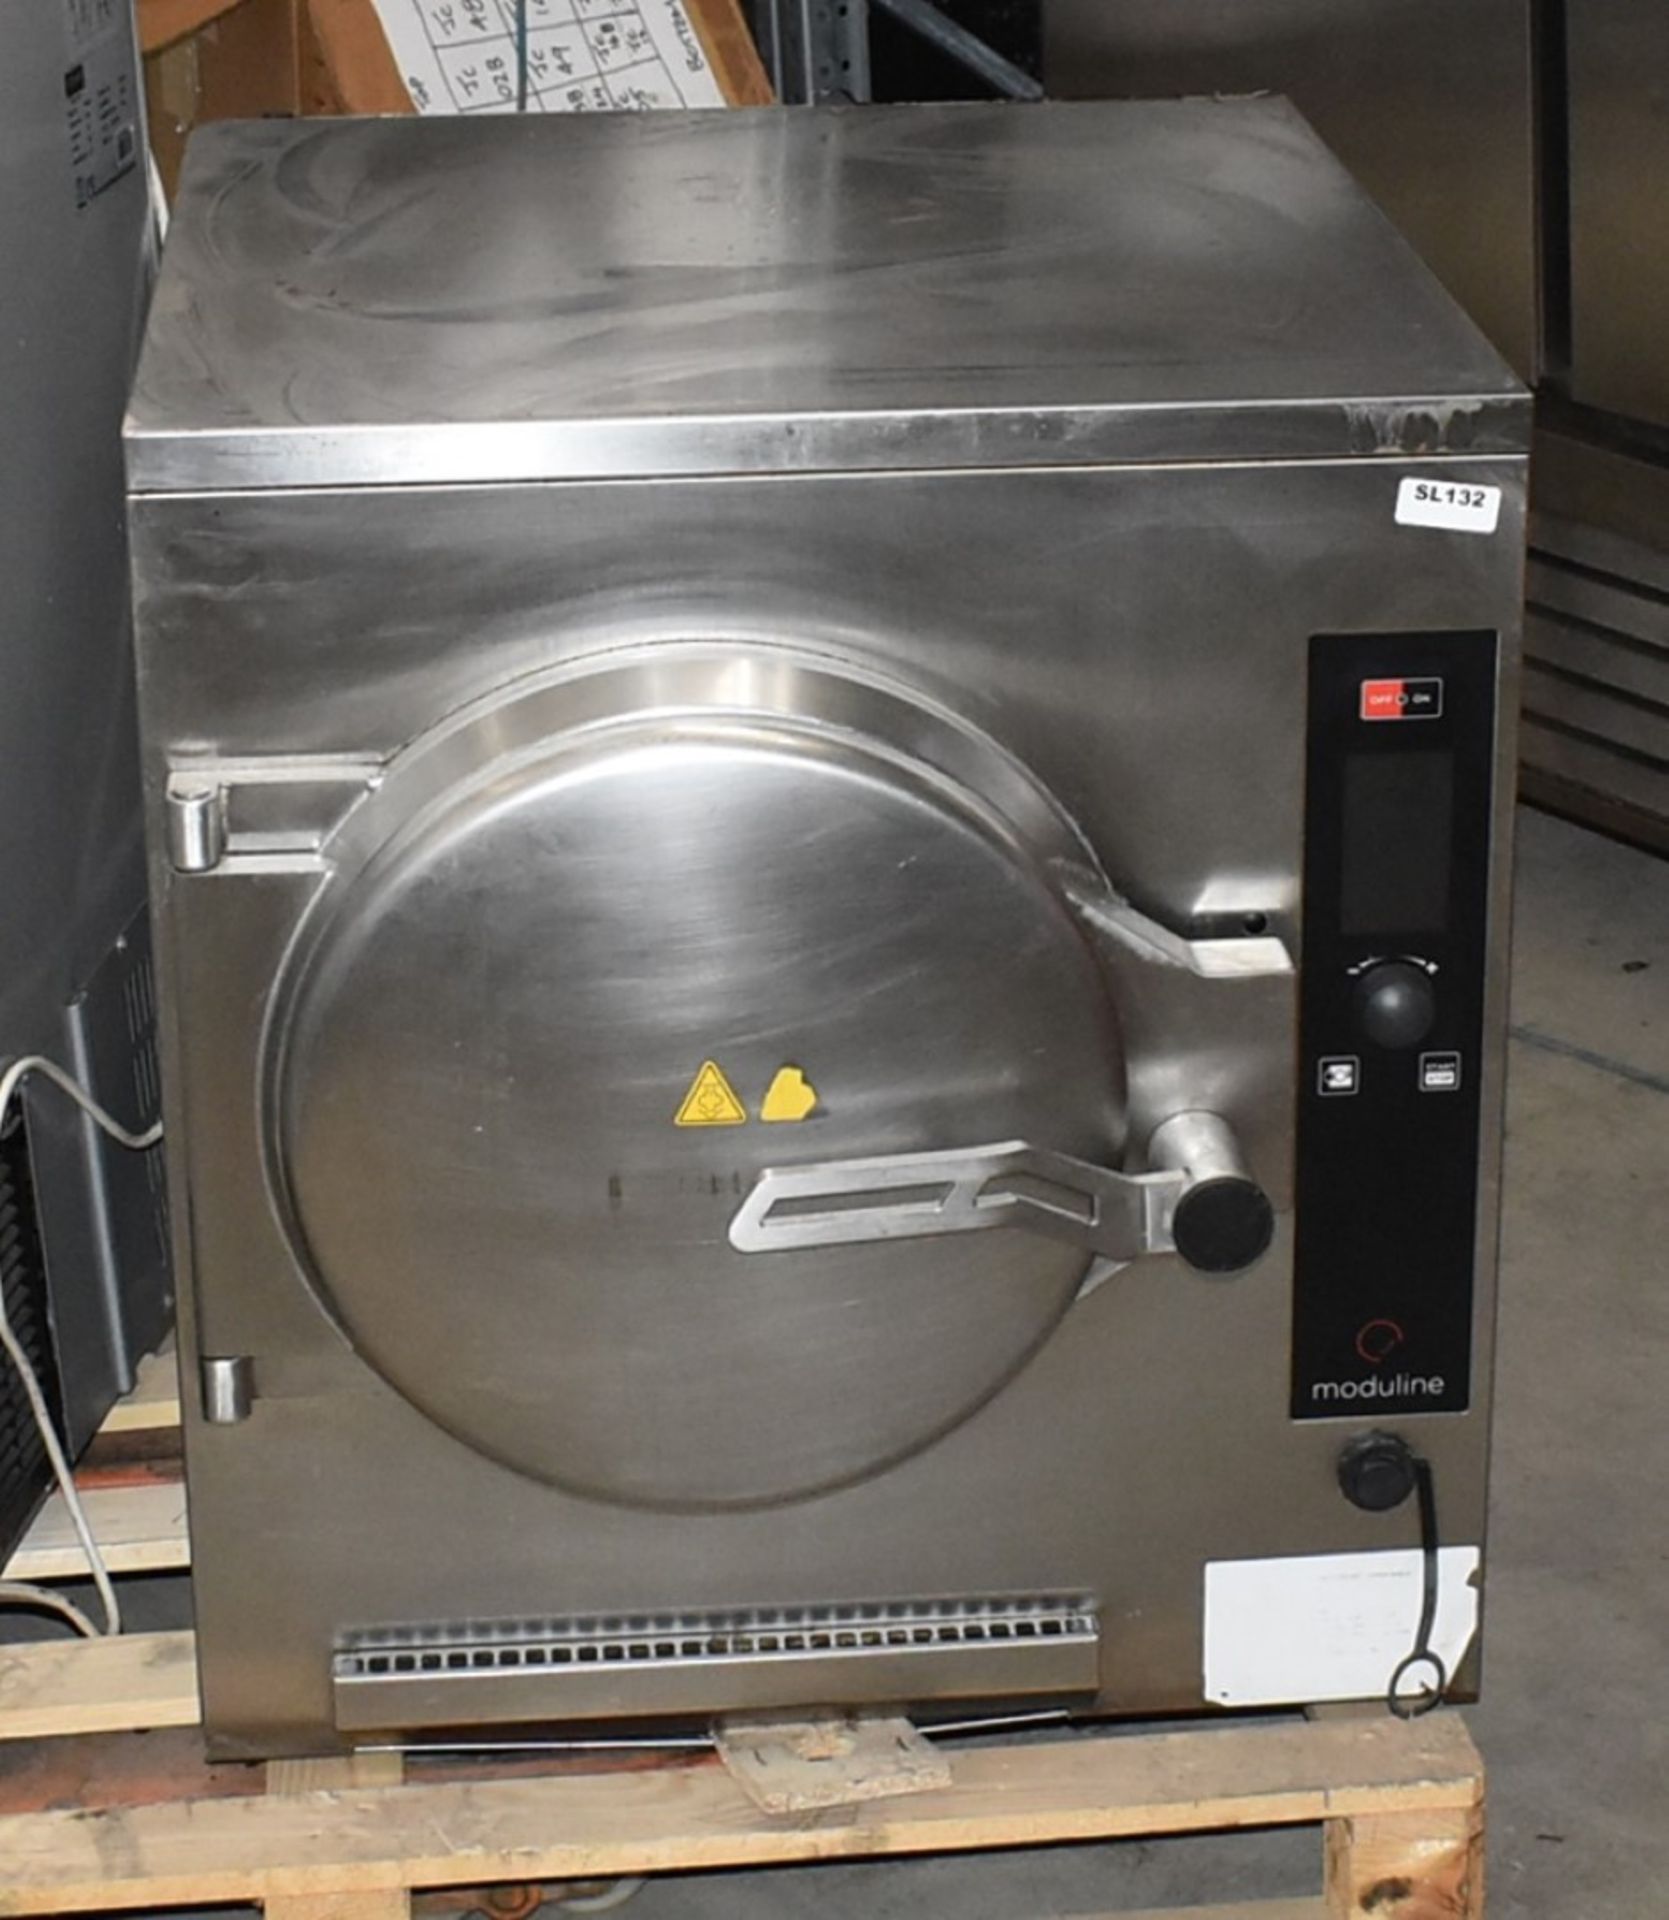 1 x Moduline Pressure Steamer Cooker - Recently Removed From a Supermarket Environment - Model - Image 5 of 8